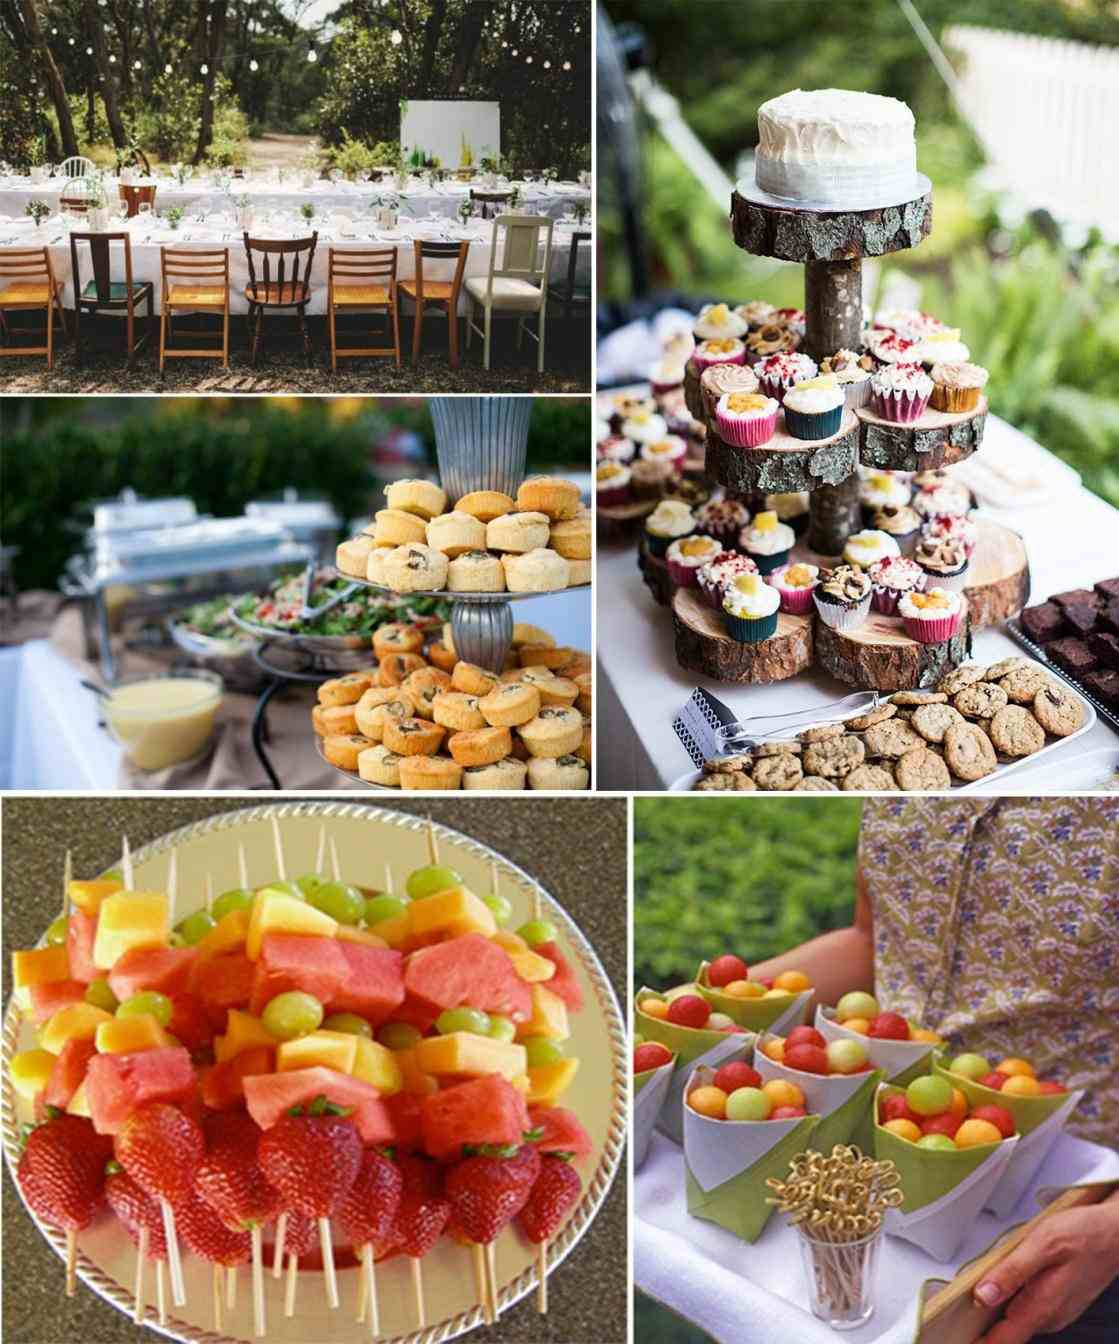 Backyard Cookout Party Ideas
 10 Backyard Cookout Ideas to Spice Up Your Backyard Party